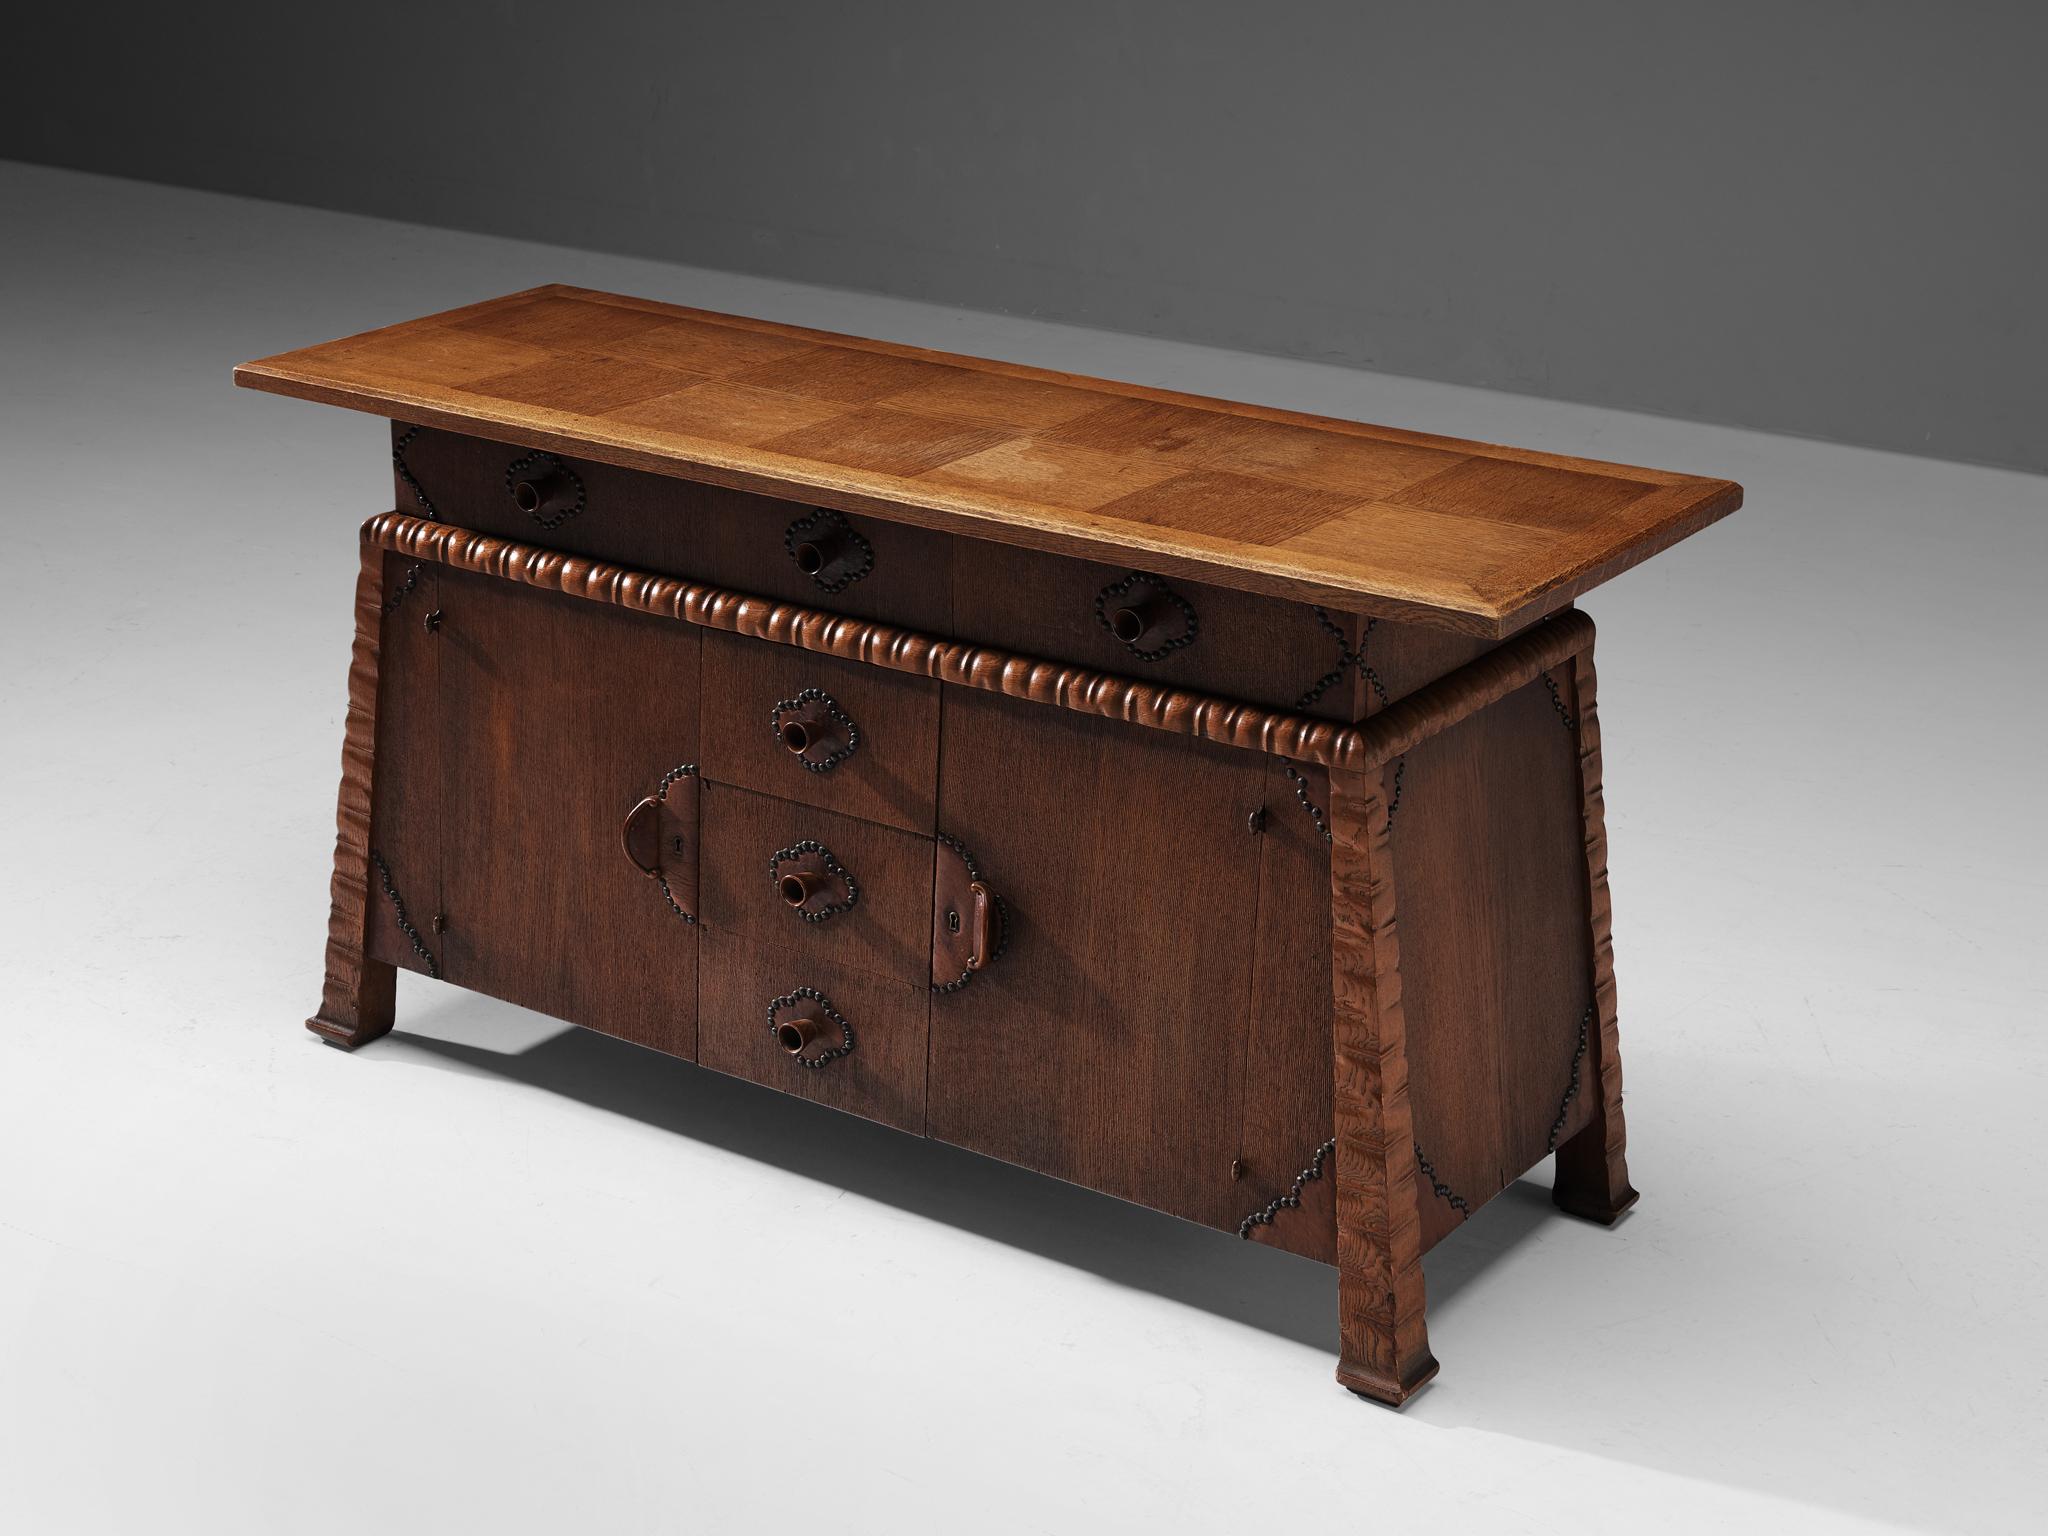 Ernesto Valabrega, cabinet, oak, metal, Italy, ca. 1935

This stunning cabinet shows the characteristics of Ernesto Valabrega's designs. The dynamic engraved corners that continue gracefully in the cabinet's feet, in combination with the carved